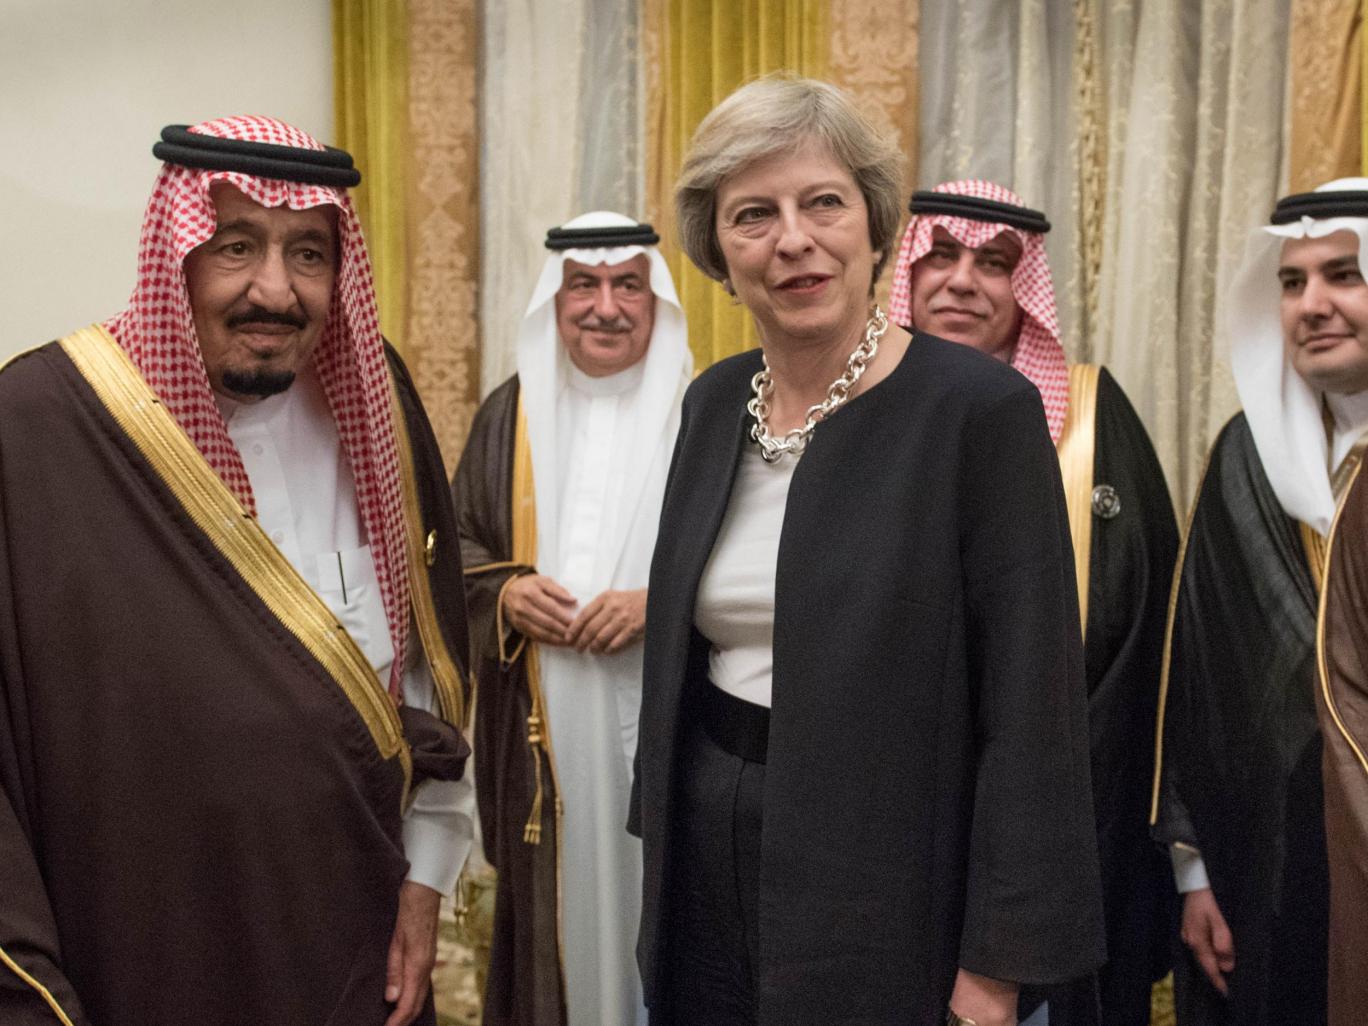 Saudi Arabia has 'clear link' to UK extremism, report says